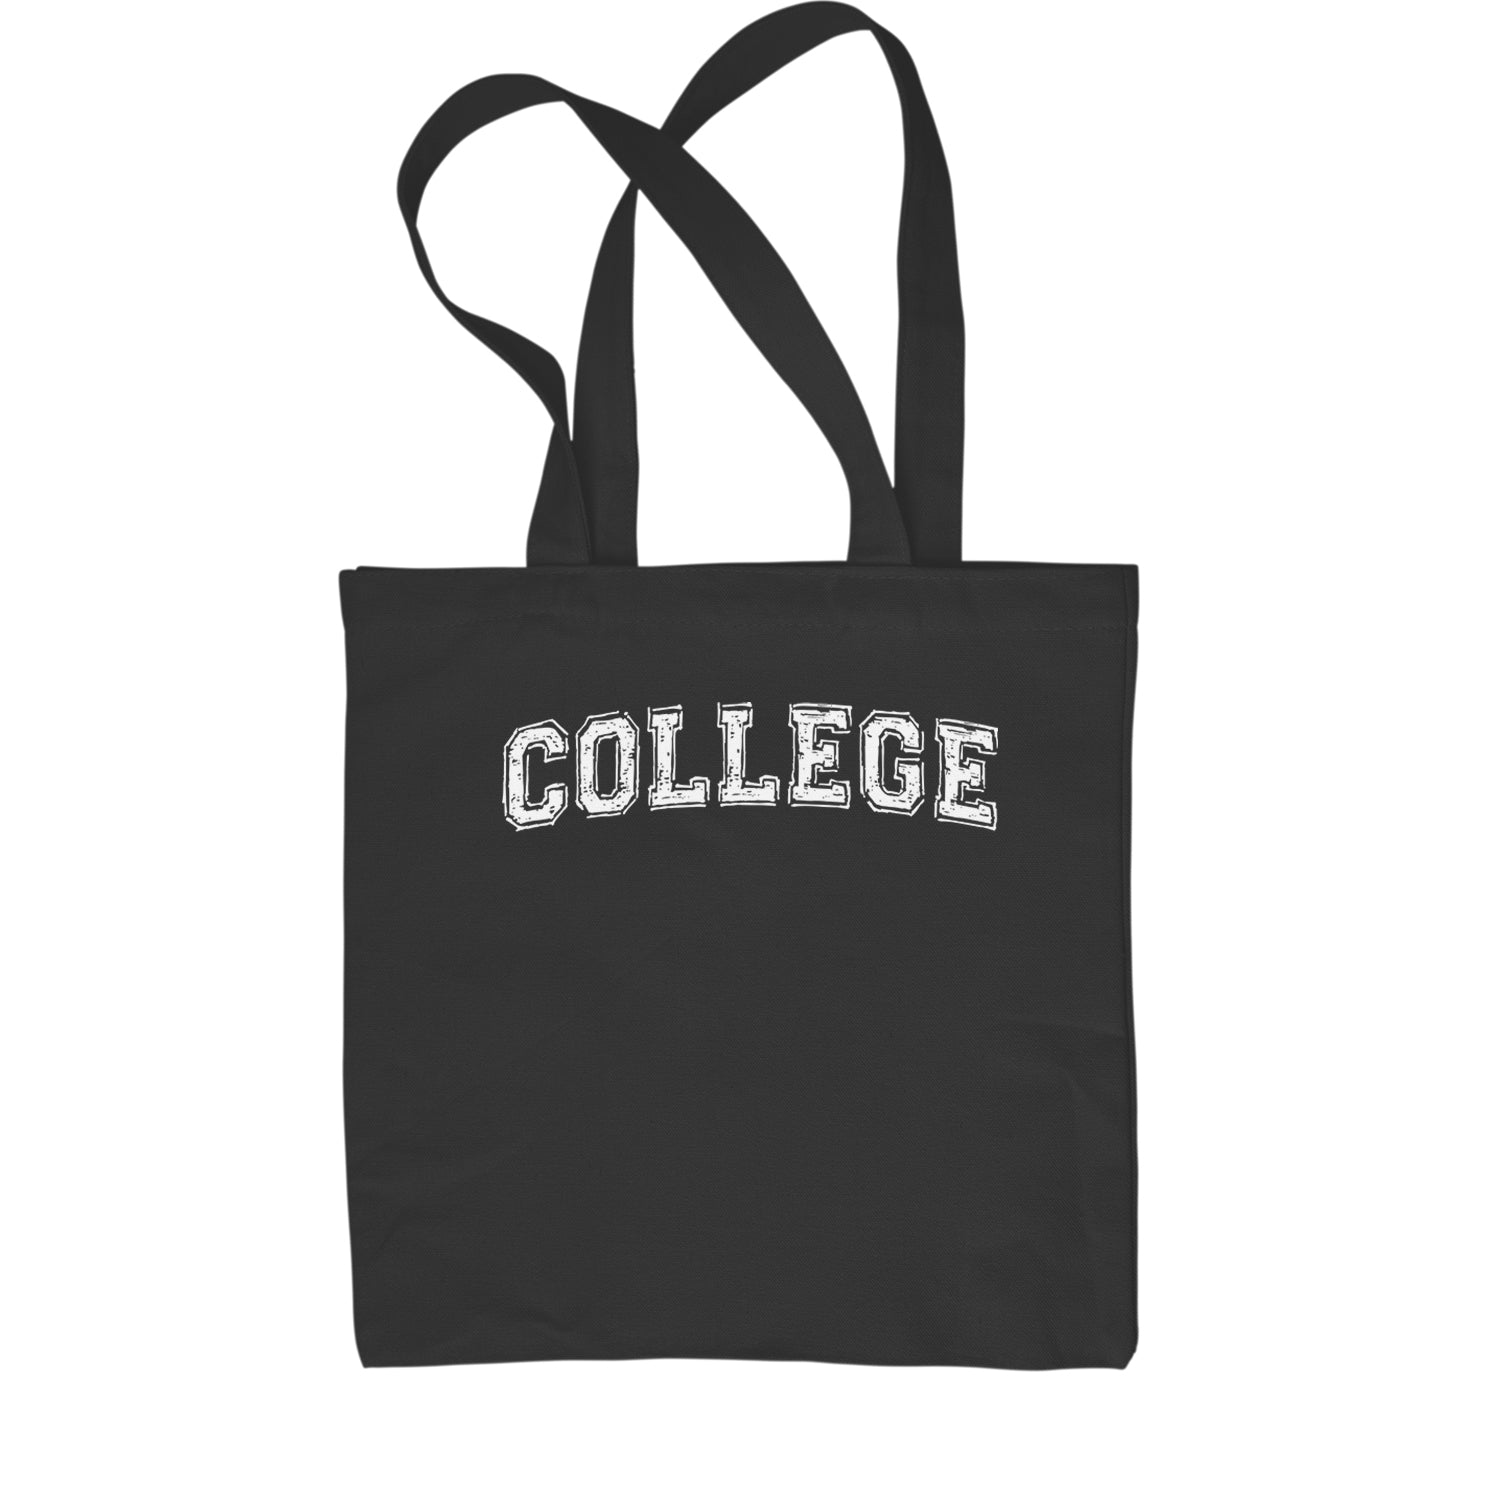 College Belushi Frat House Party Bluto Tribute Animal Shopping Tote Bag